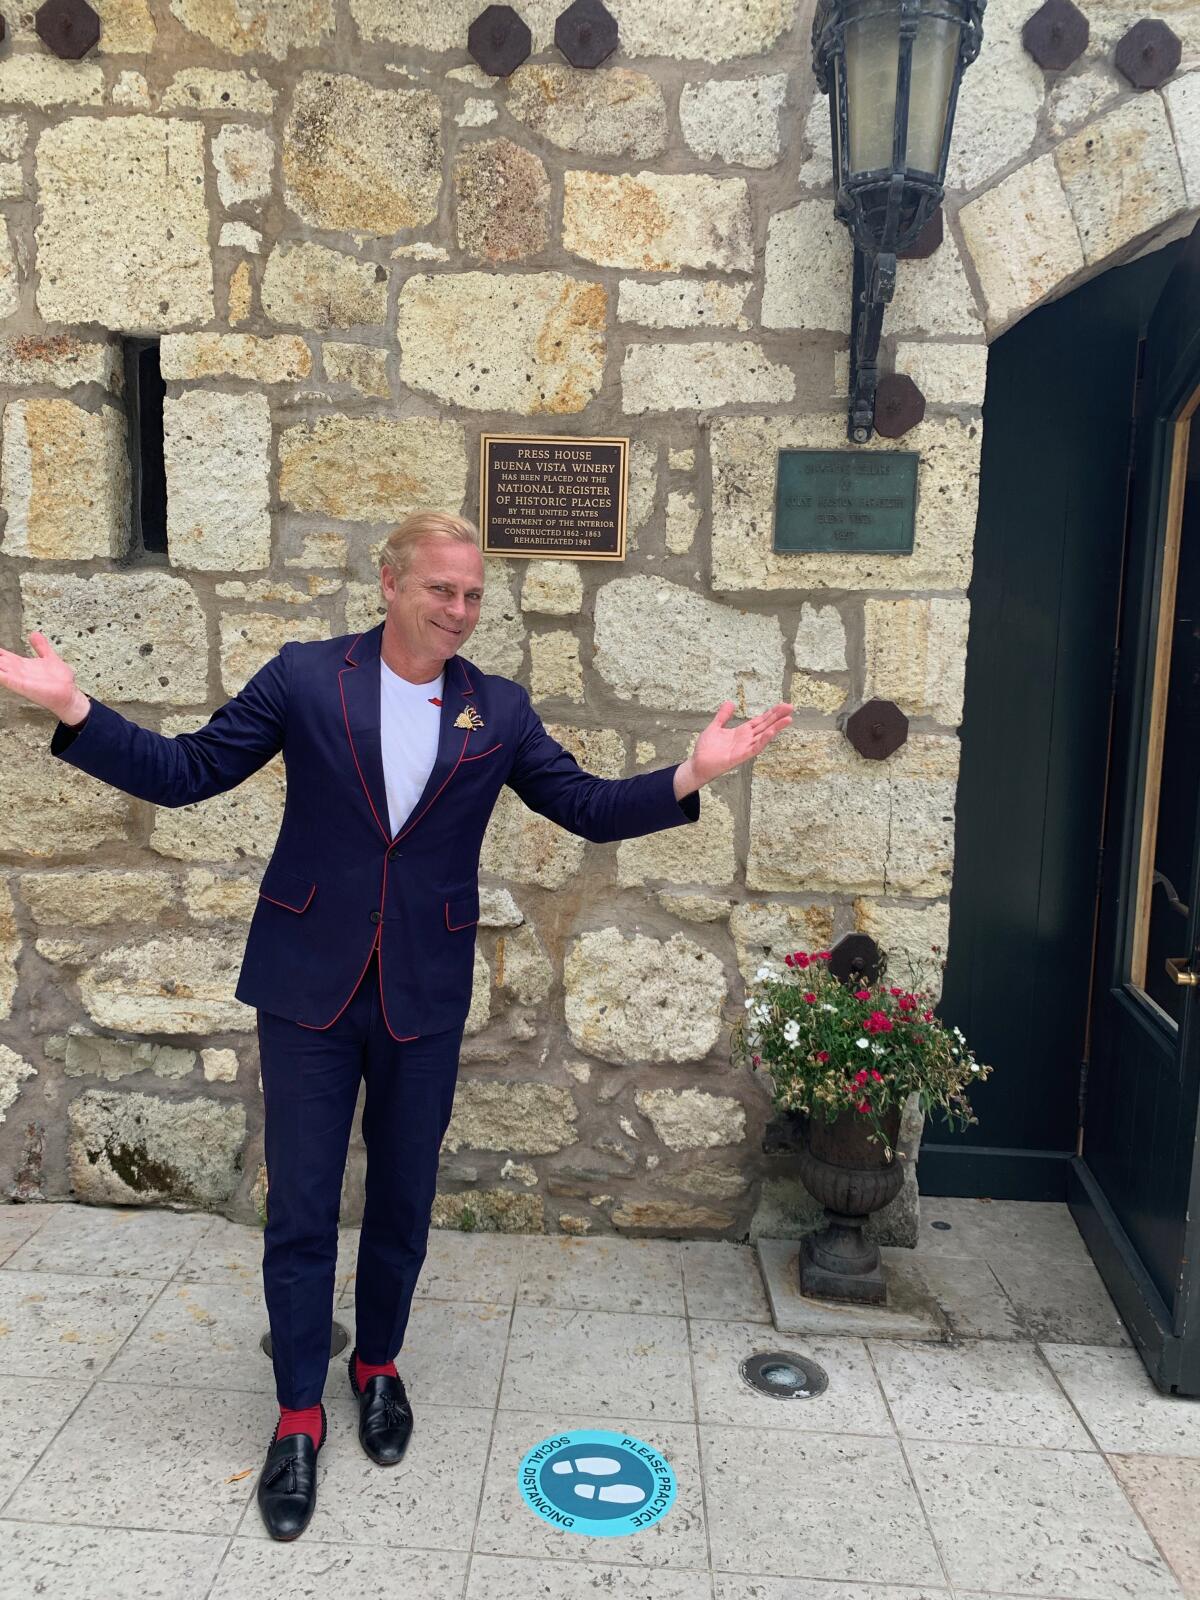 Jean Charles Boisset, owner of the Buena Vista Winery in Sonoma, Calif., greets guests on May 29.